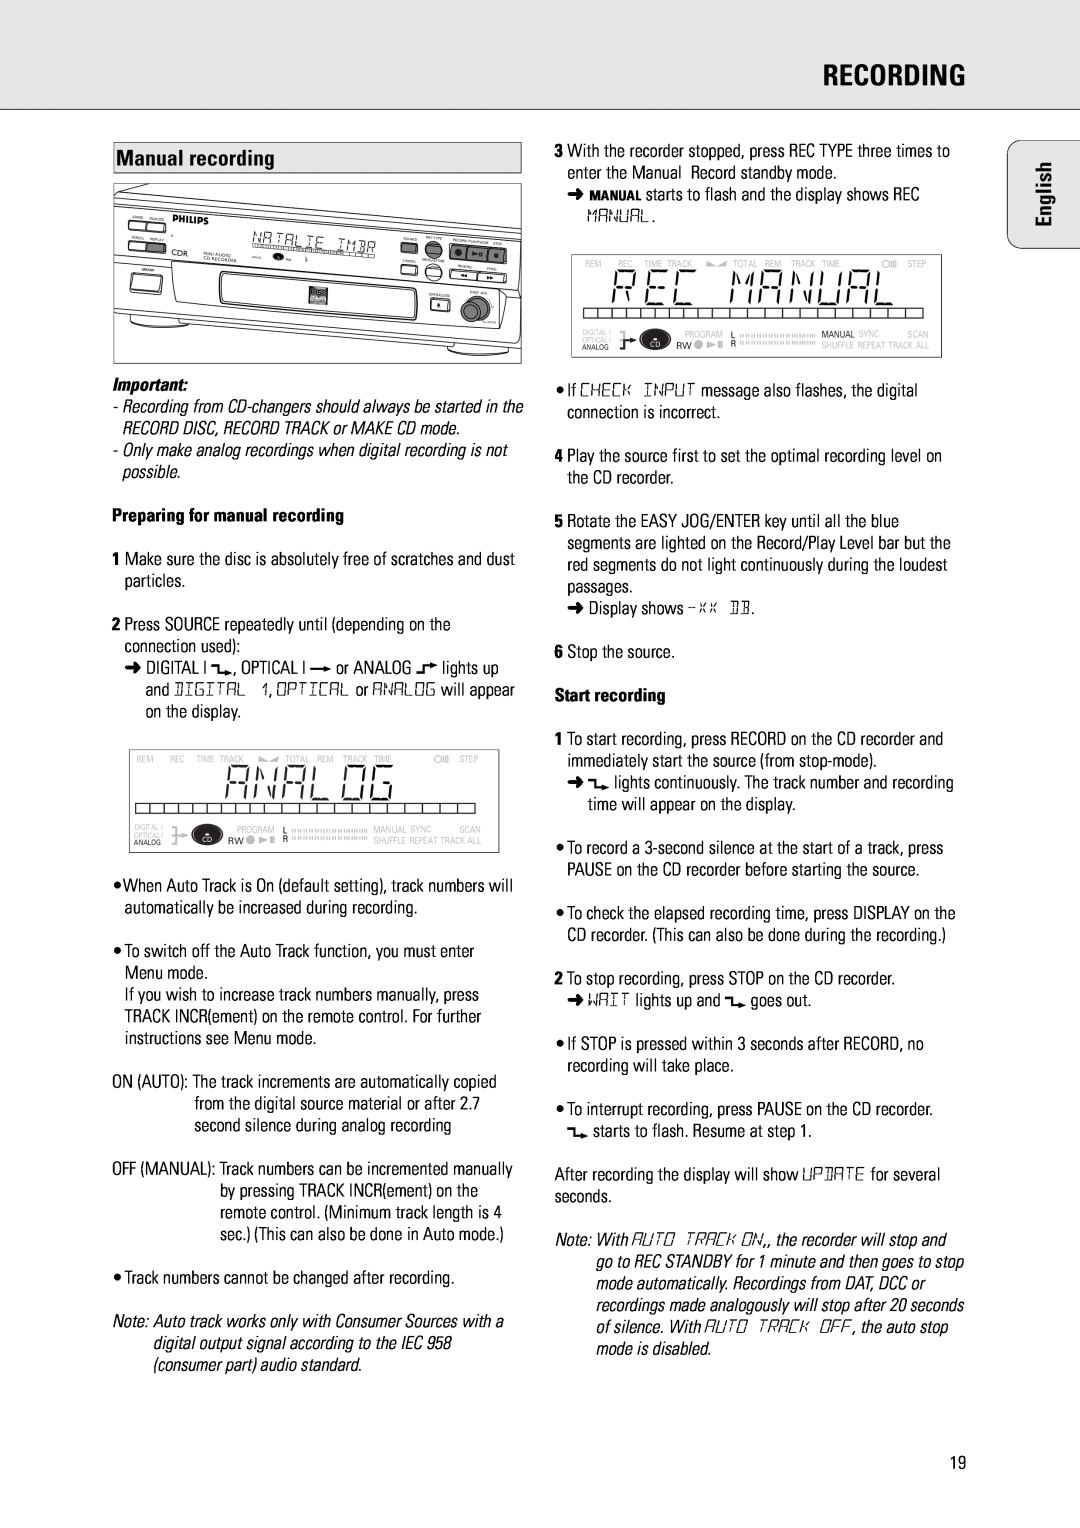 Philips CDR570 Manual recording, Preparing for manual recording, Recording, English, Start recording 